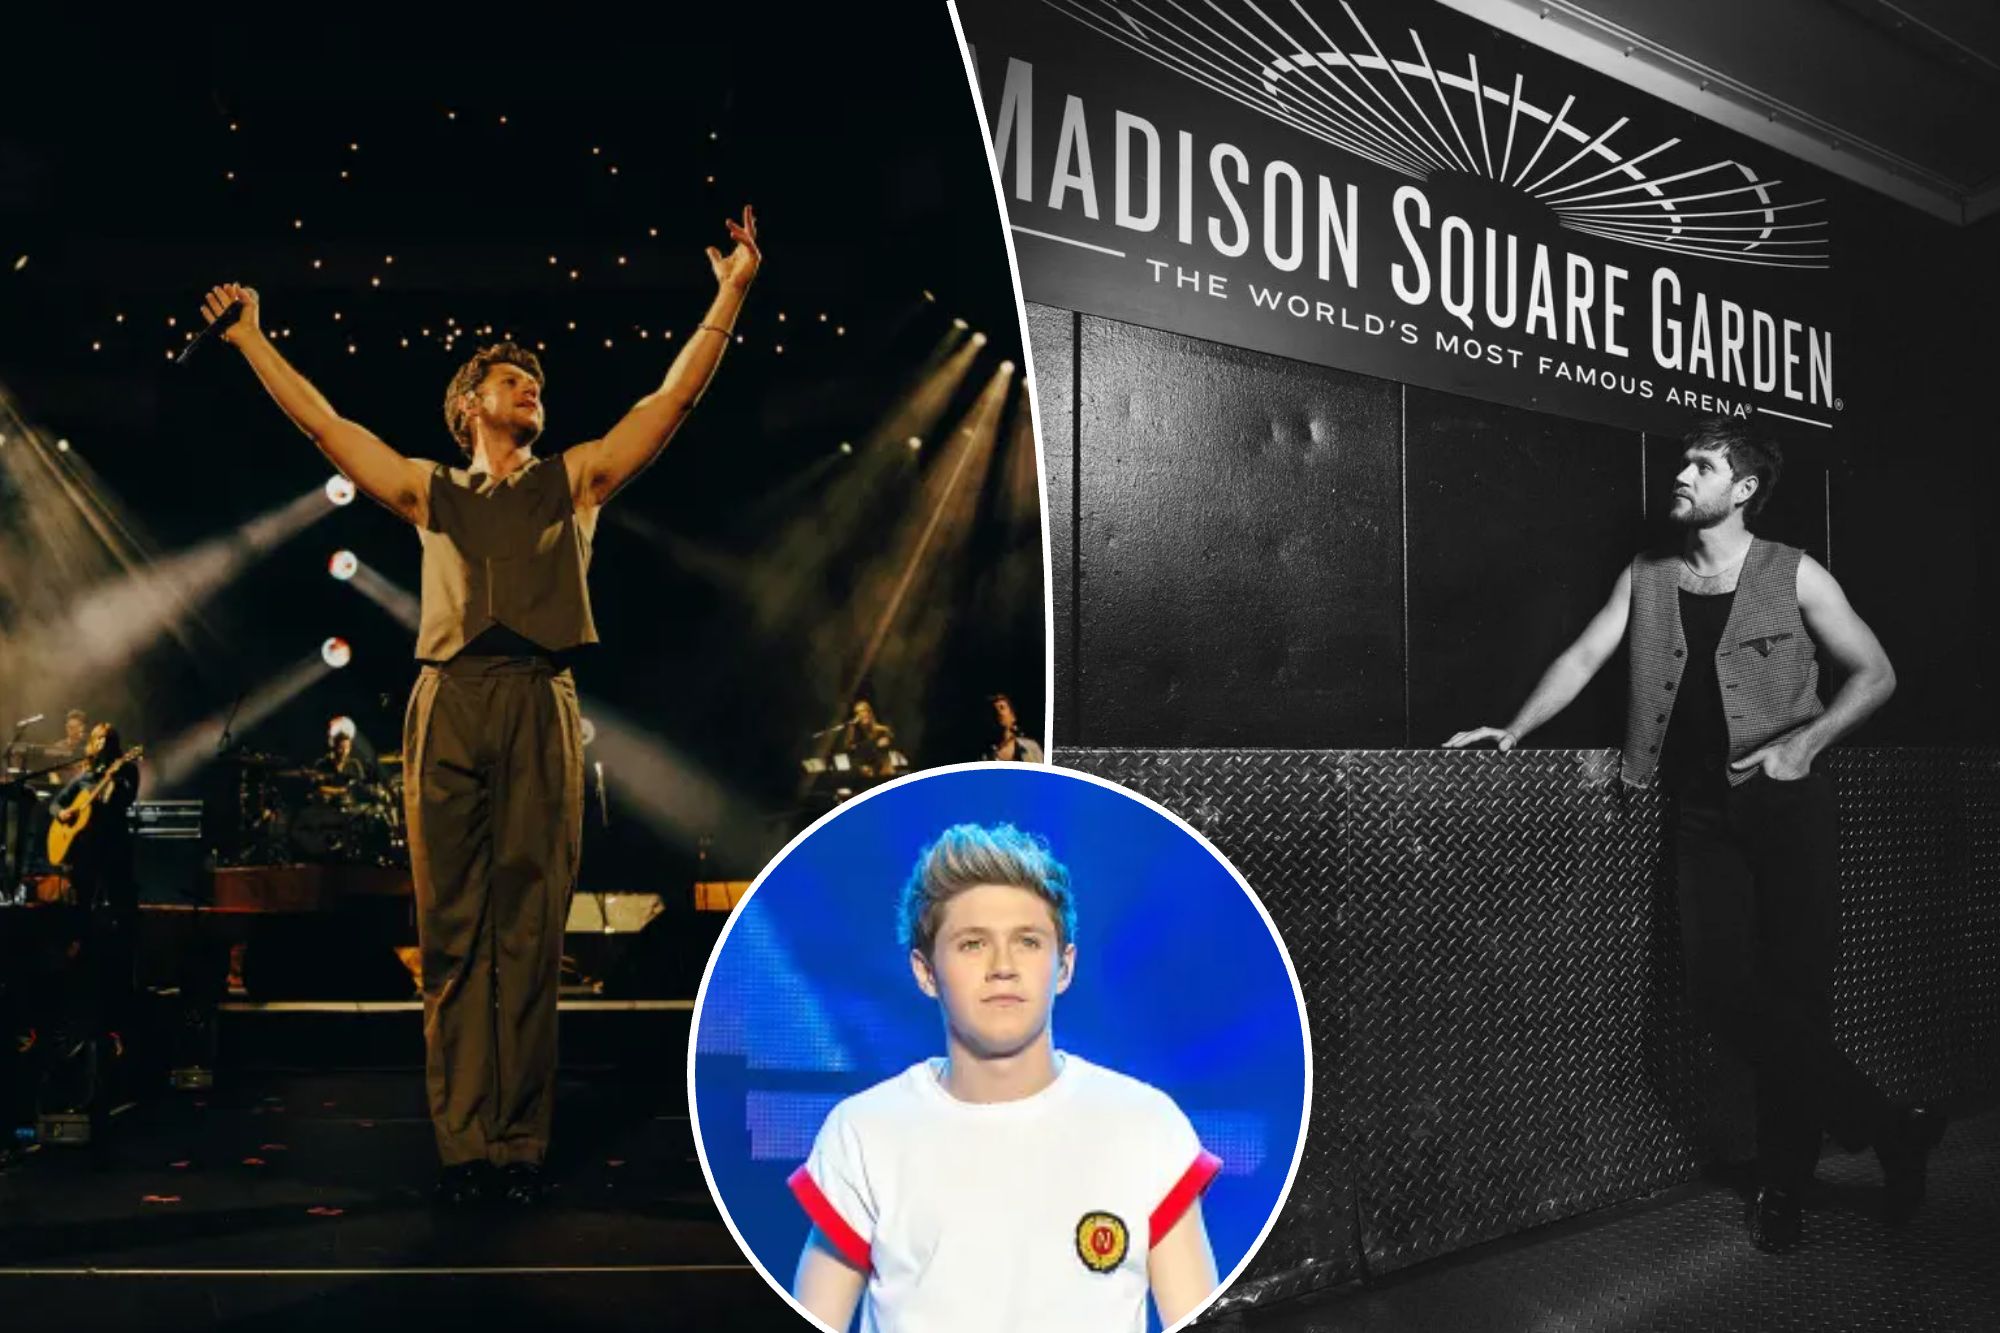 From One Direction to Madison Square Garden: Niall Horan's Unbelievable Transformation!